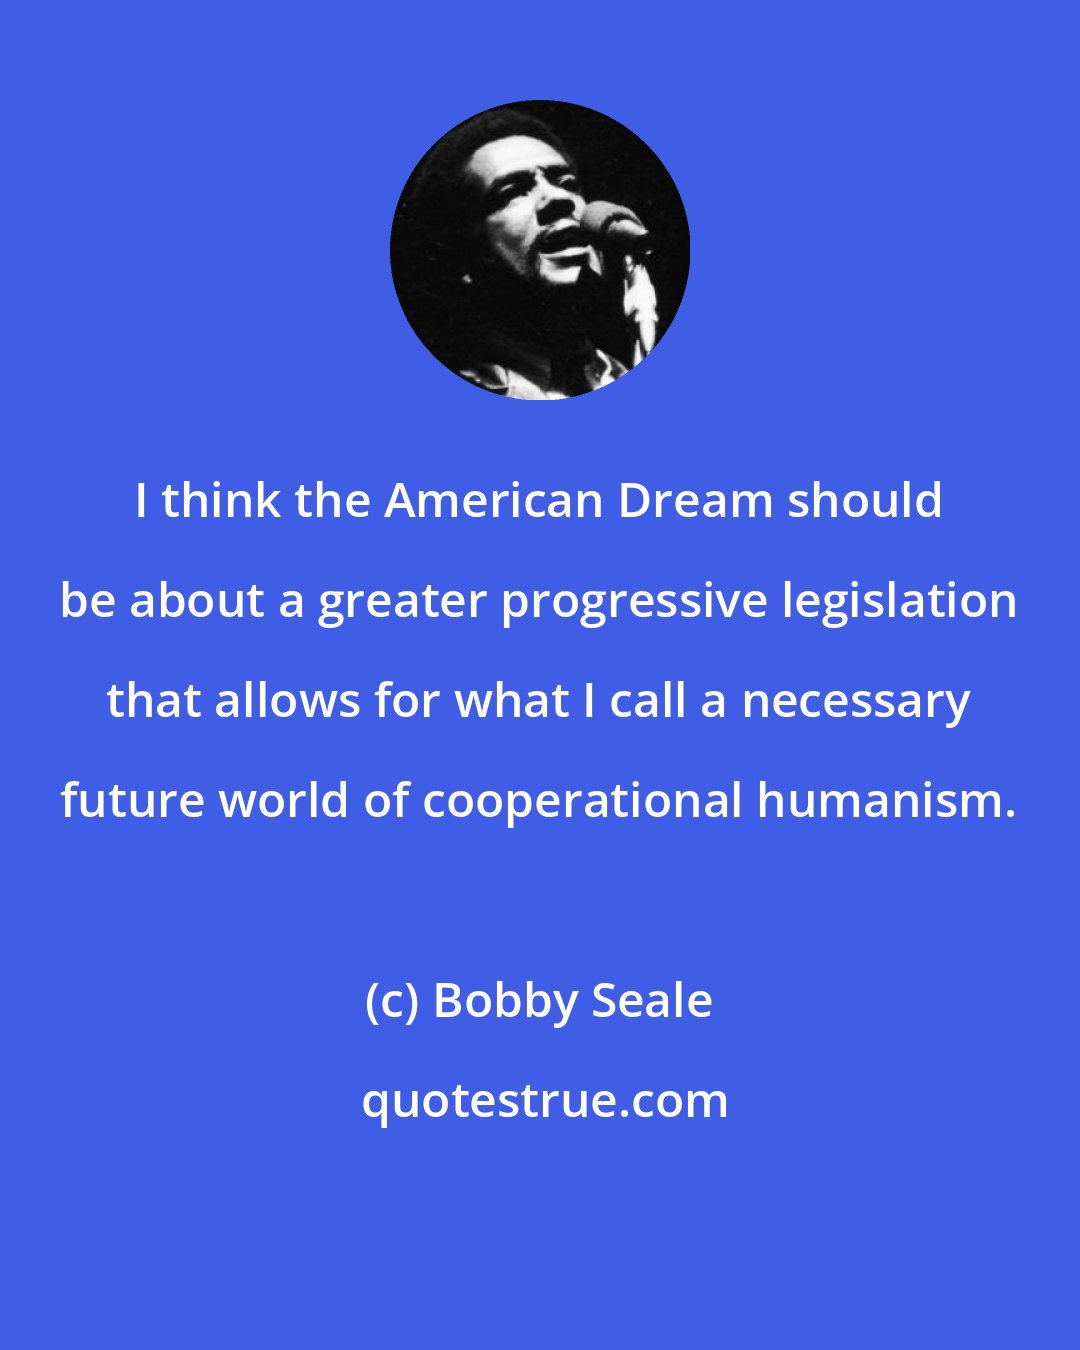 Bobby Seale: I think the American Dream should be about a greater progressive legislation that allows for what I call a necessary future world of cooperational humanism.